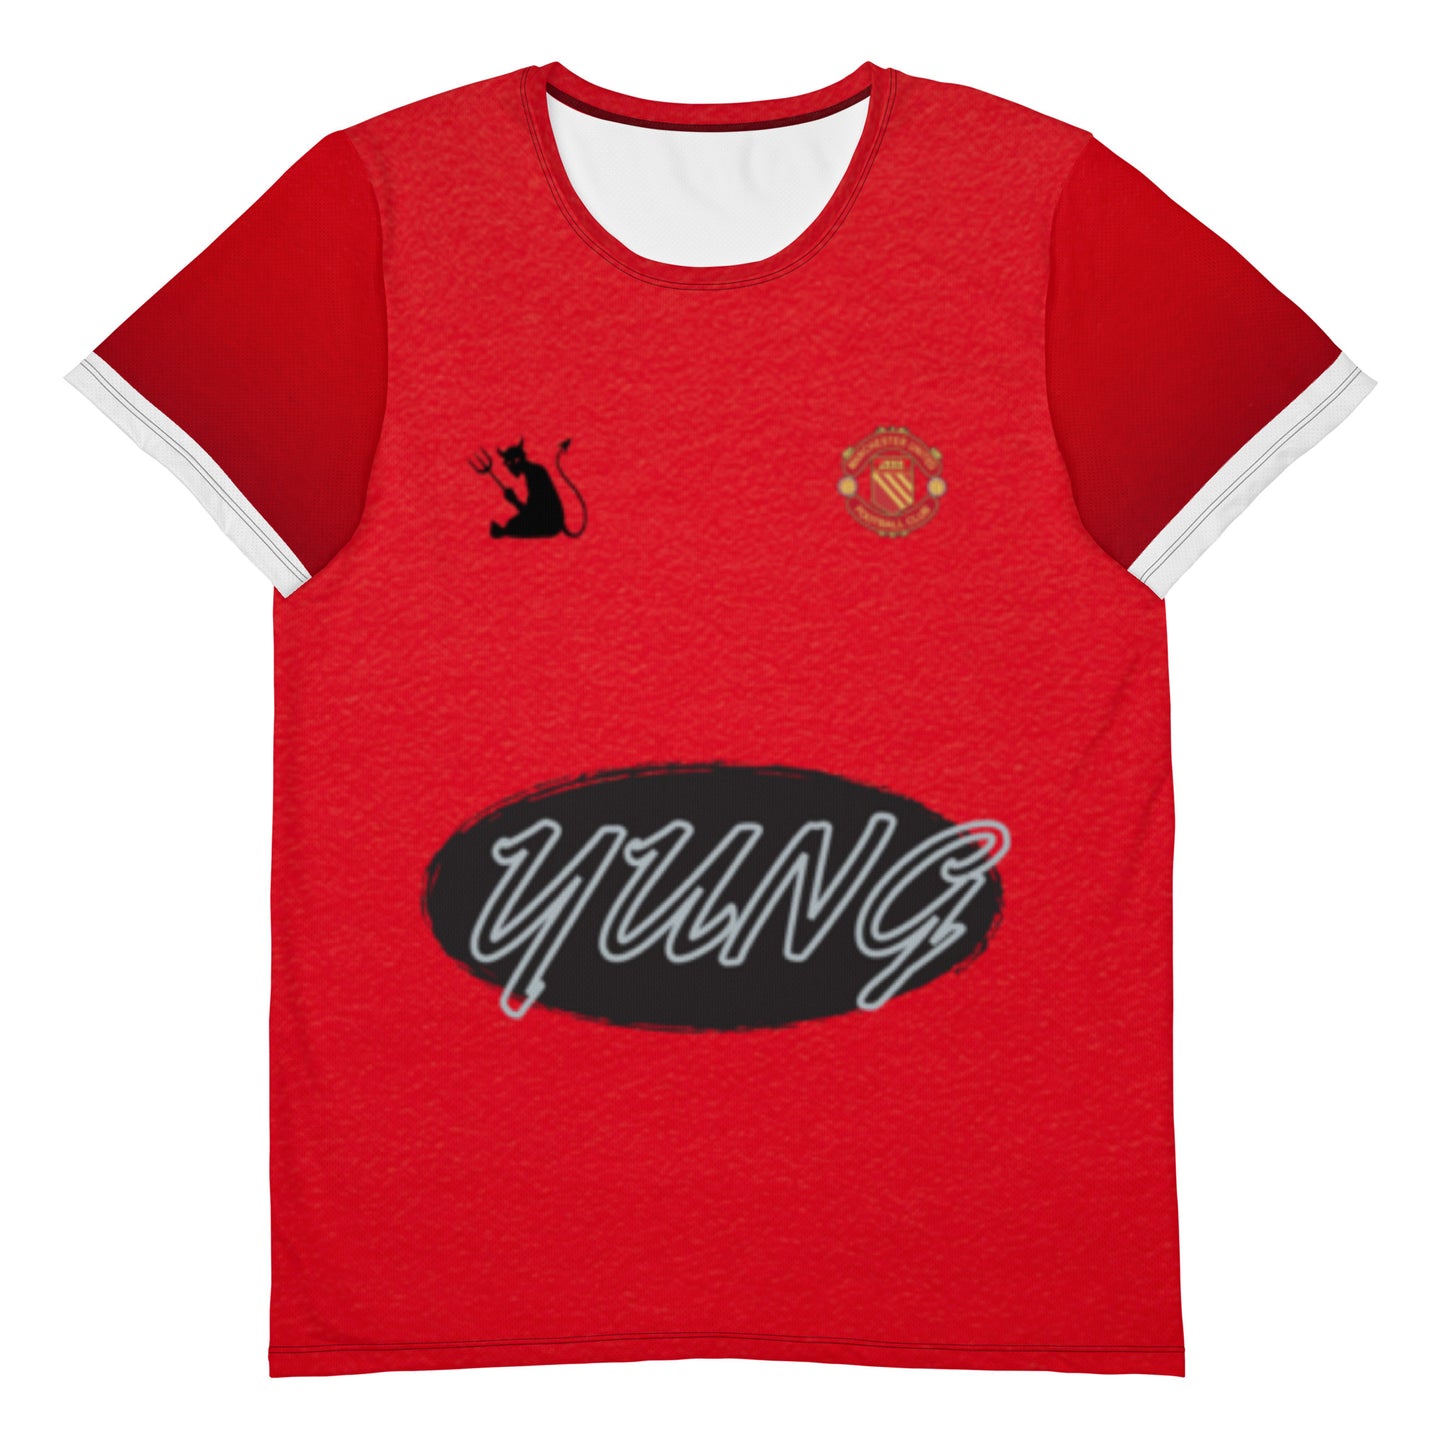 "RedDevil" by UThinkImYung All-Over Print Men's Athletic T-shirt (only 11 available in each size)